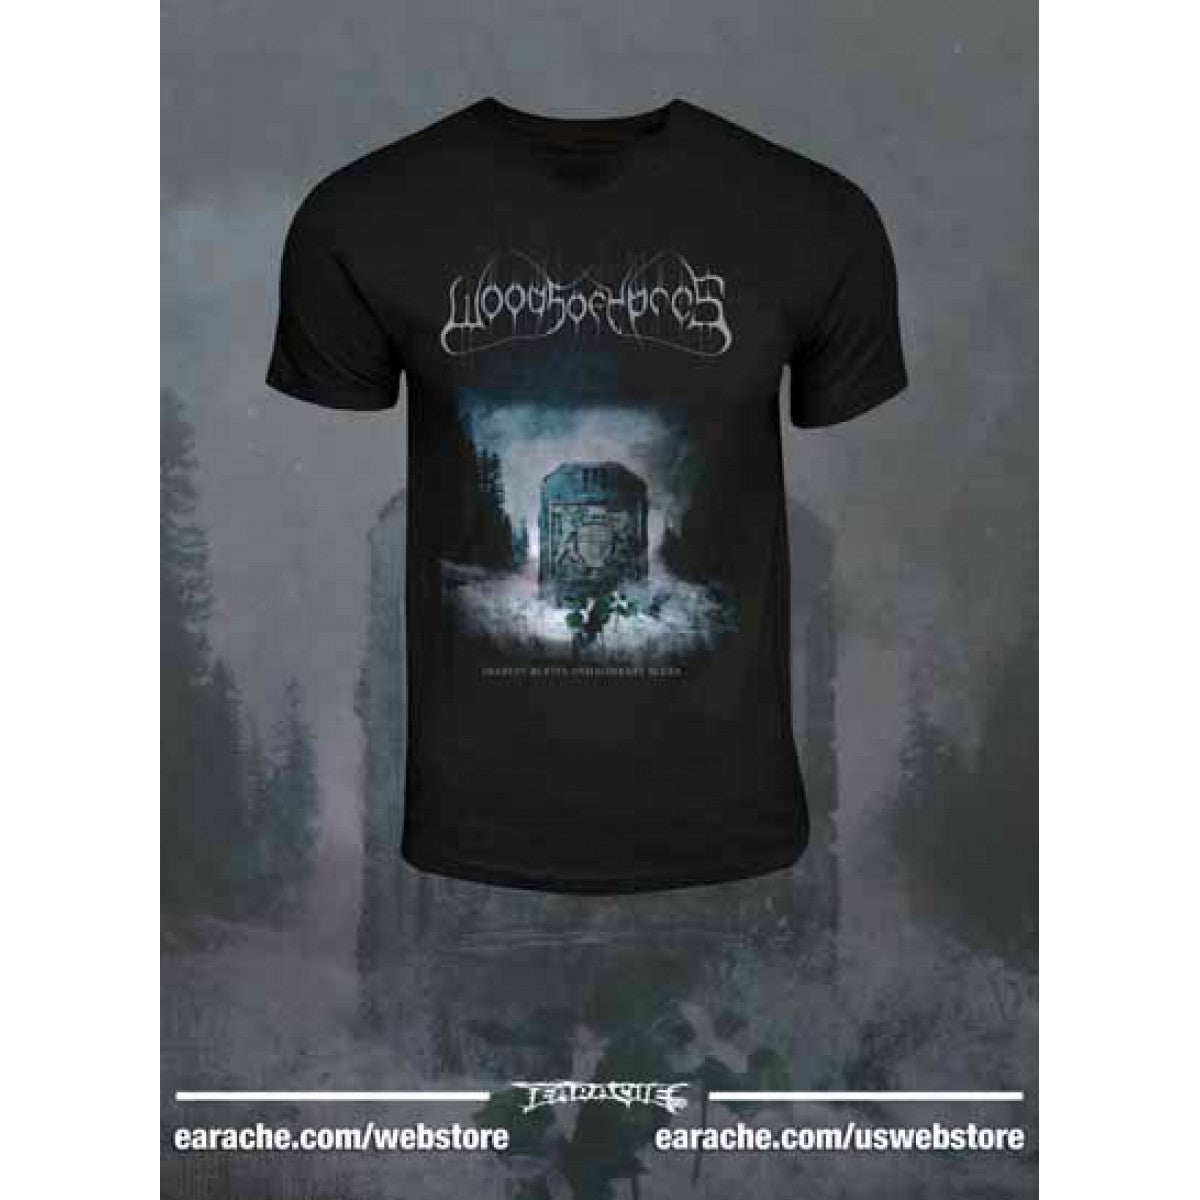 Woods Of Ypres "Woods III: The Deepest Roots and Darkest Blues" T-shirt